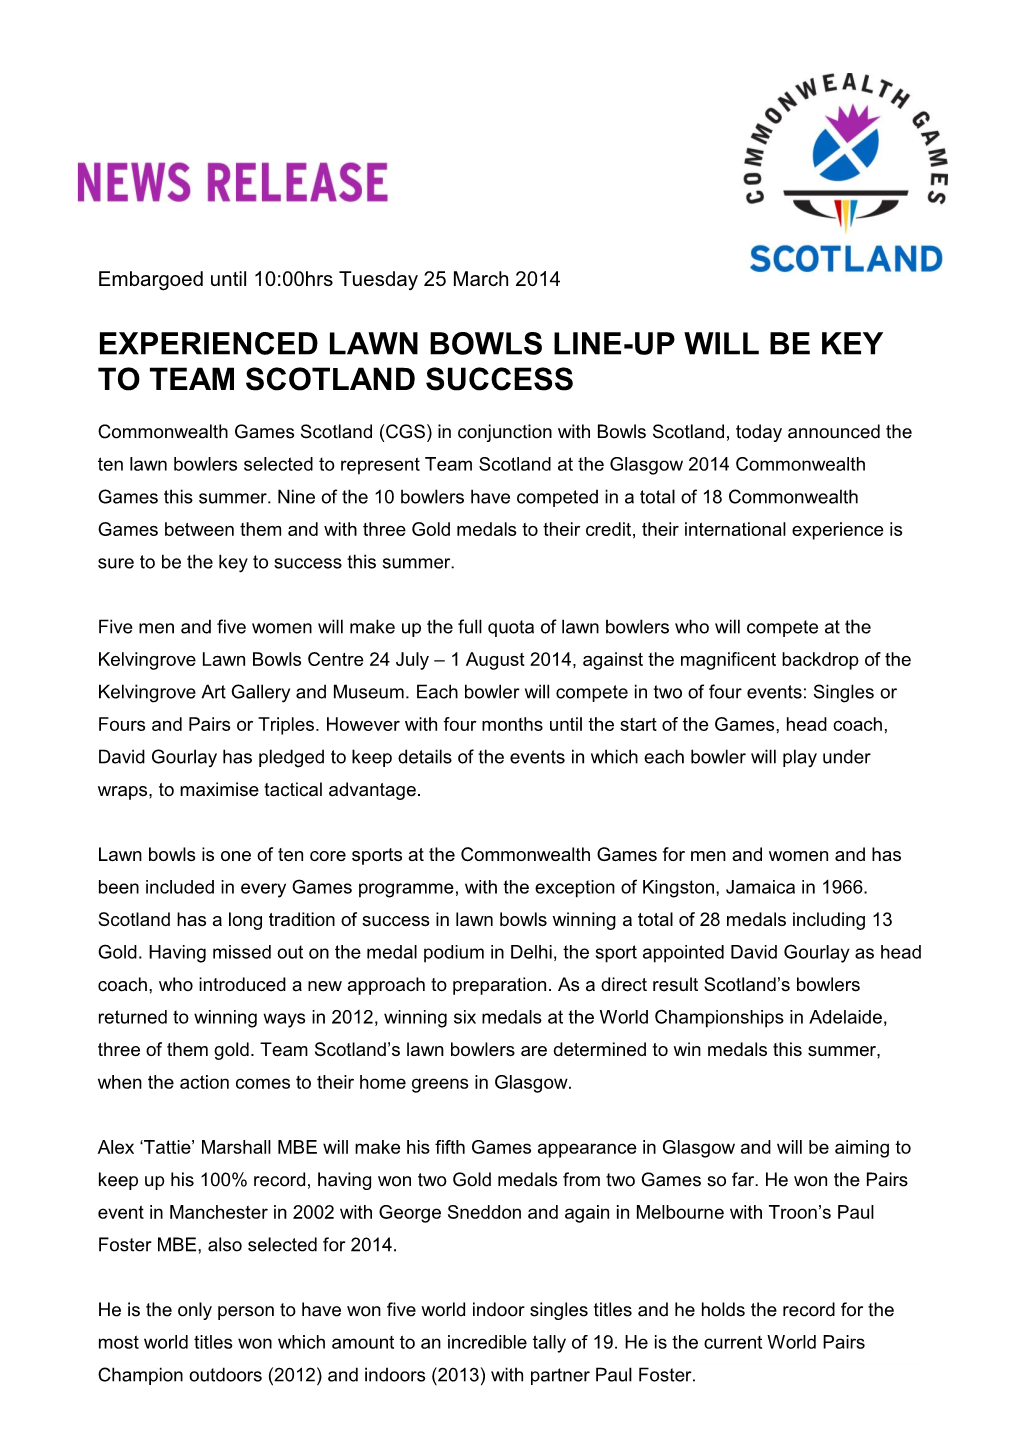 Experienced Lawn Bowls Line-Up Will Be Key to Team Scotland Success